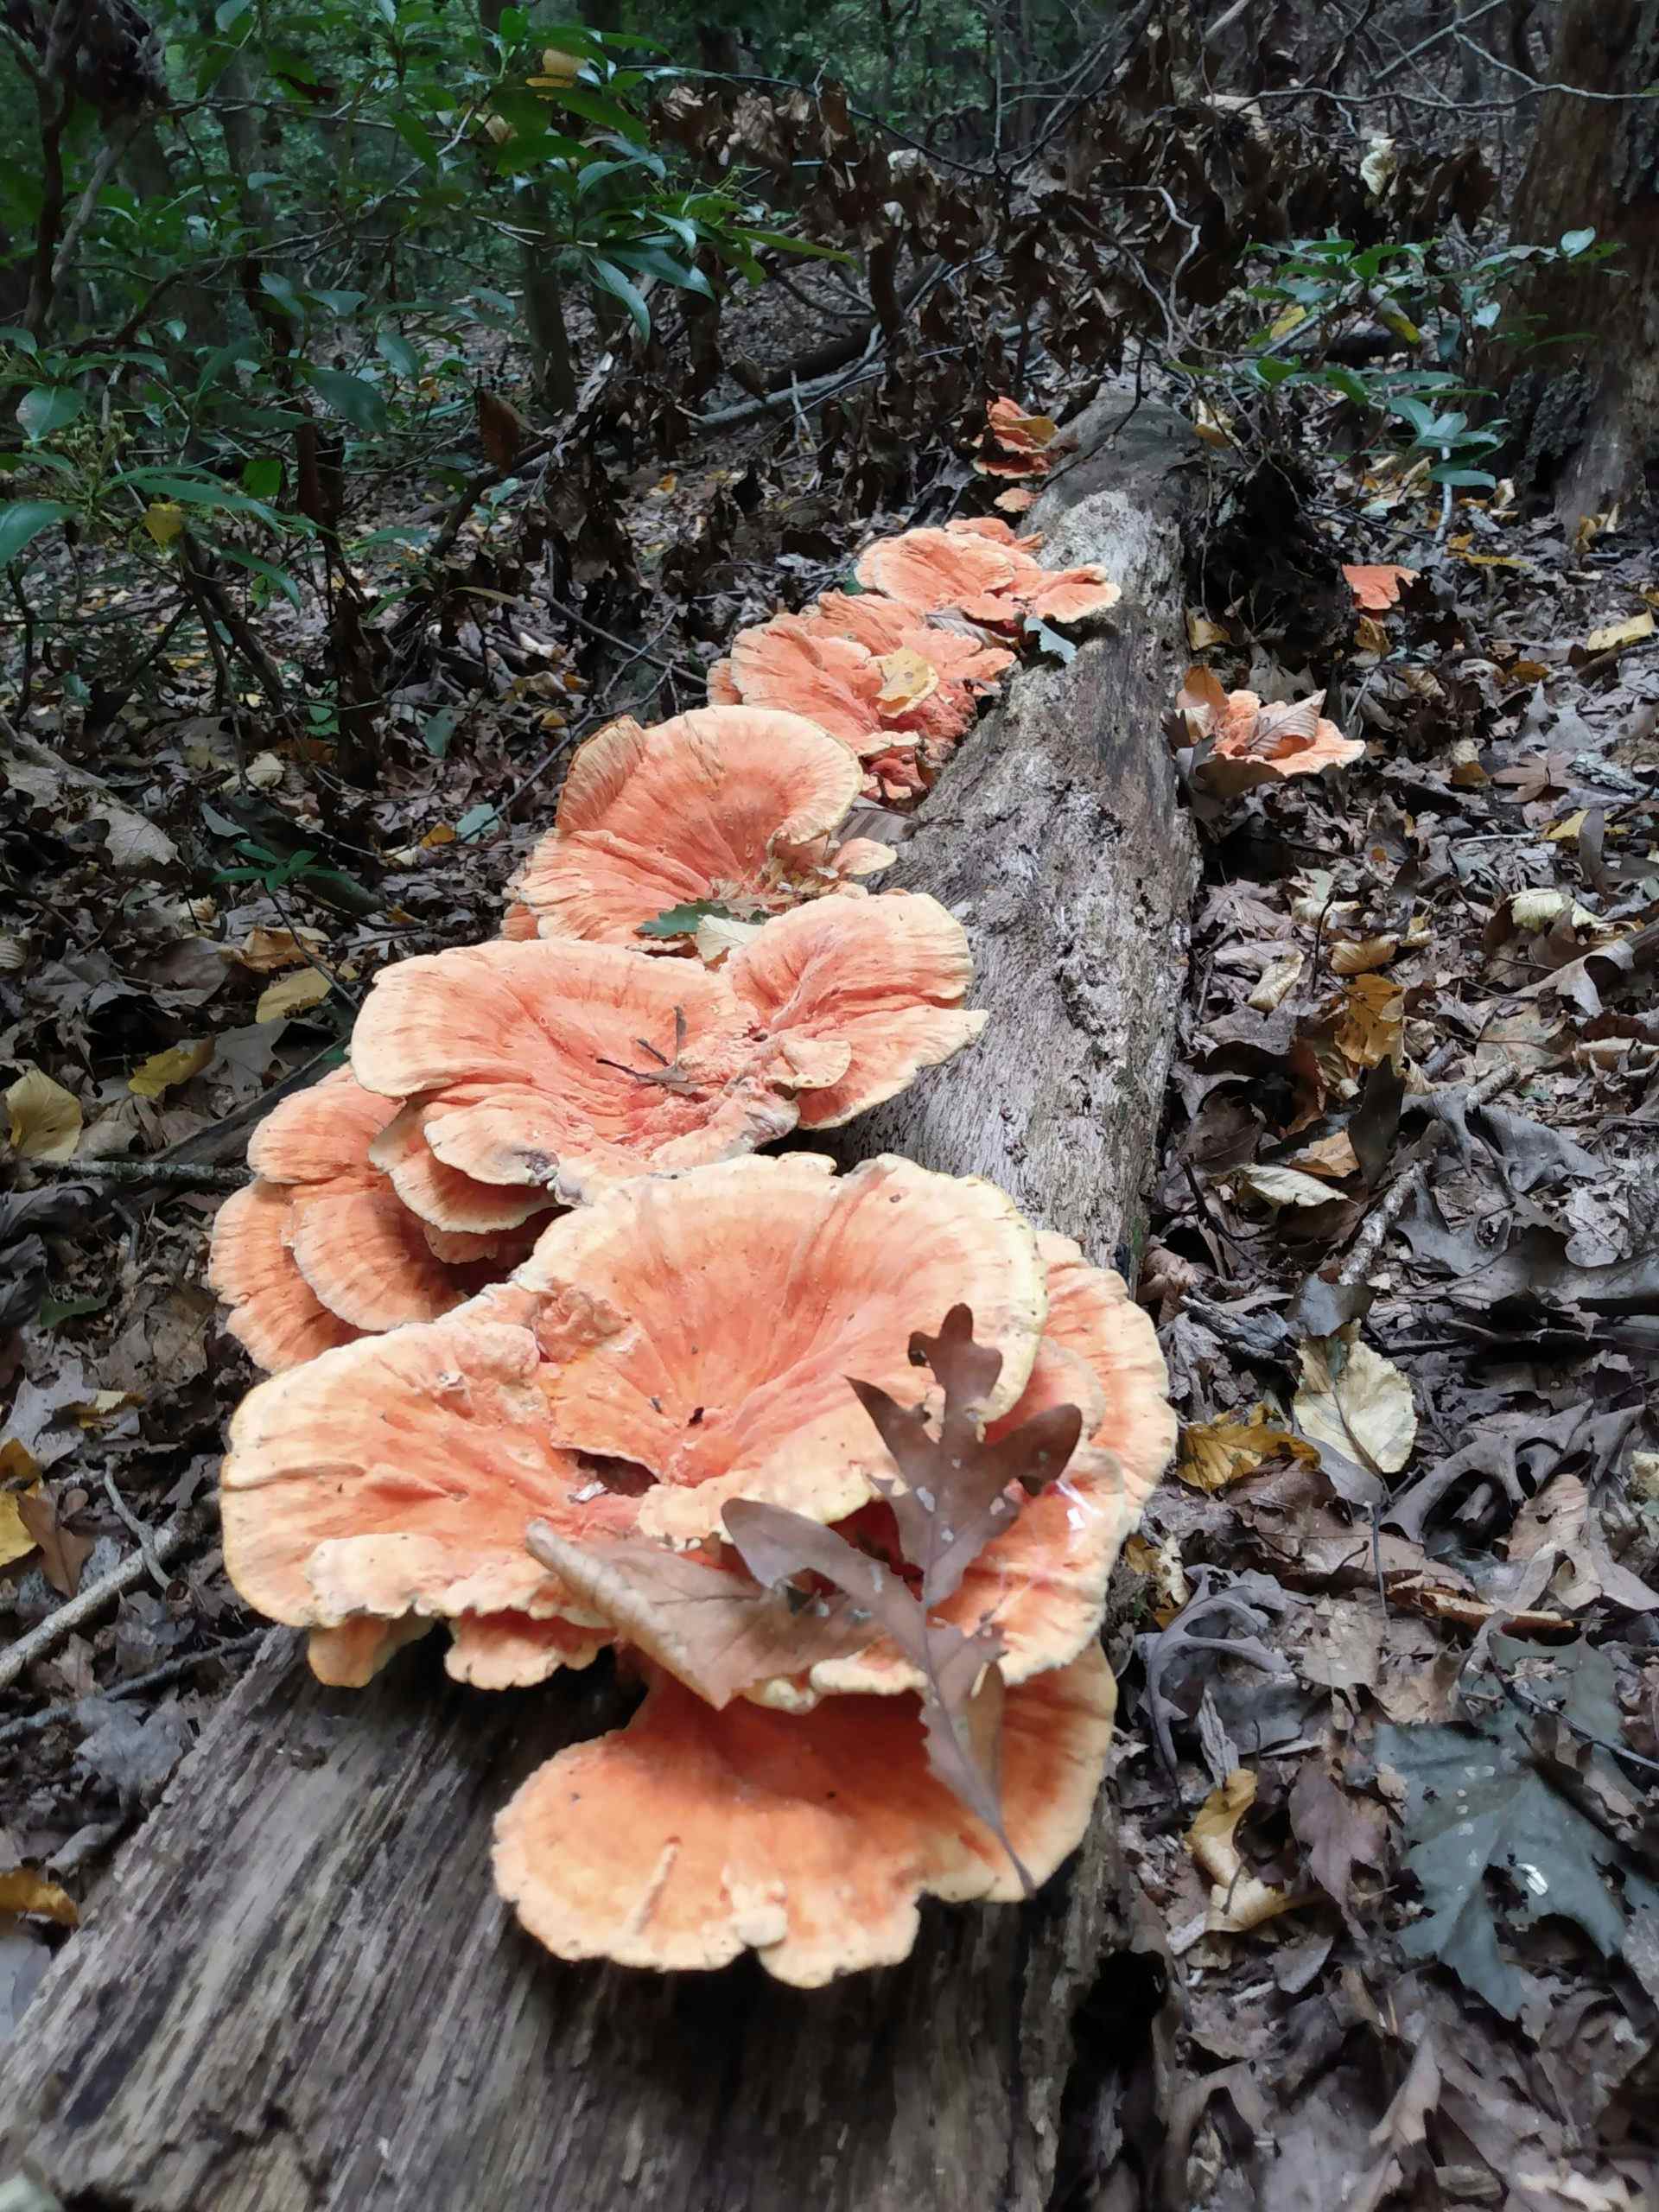 Dehydrated Chicken of the woods mushrooms